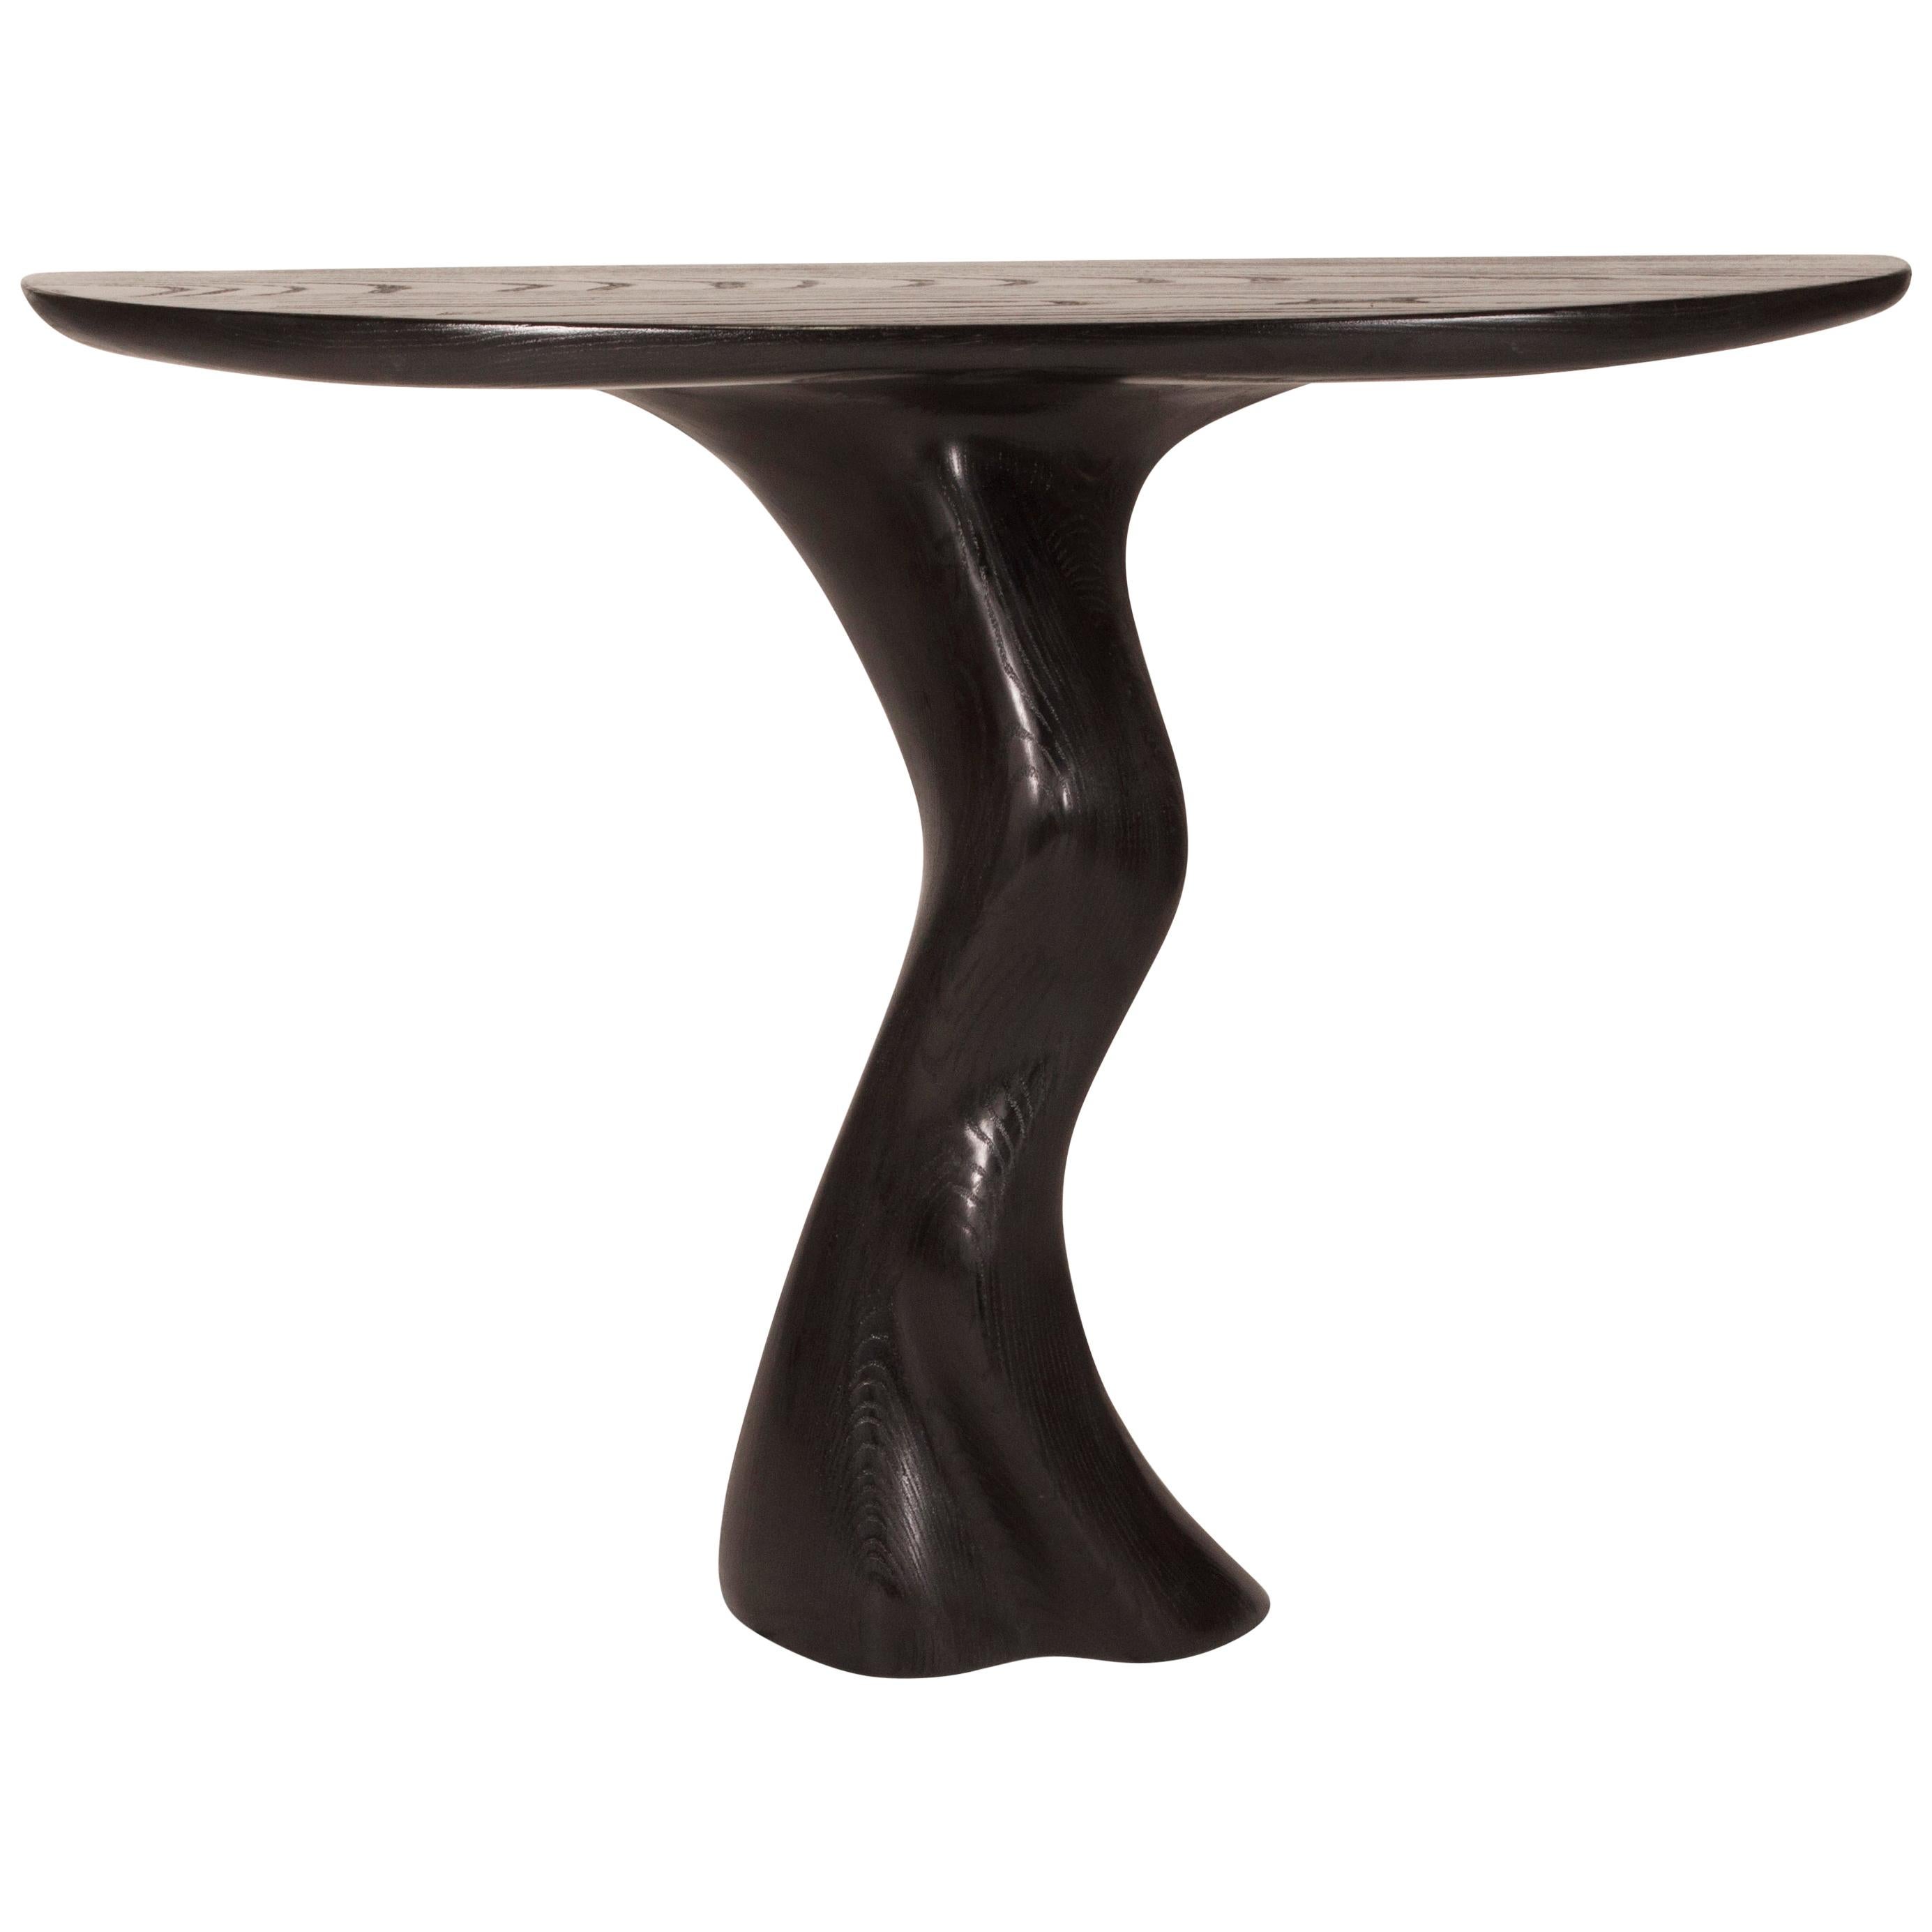 Haya Console Table, Solid Wood, Ebony Stained, Wall Mounted For Sale